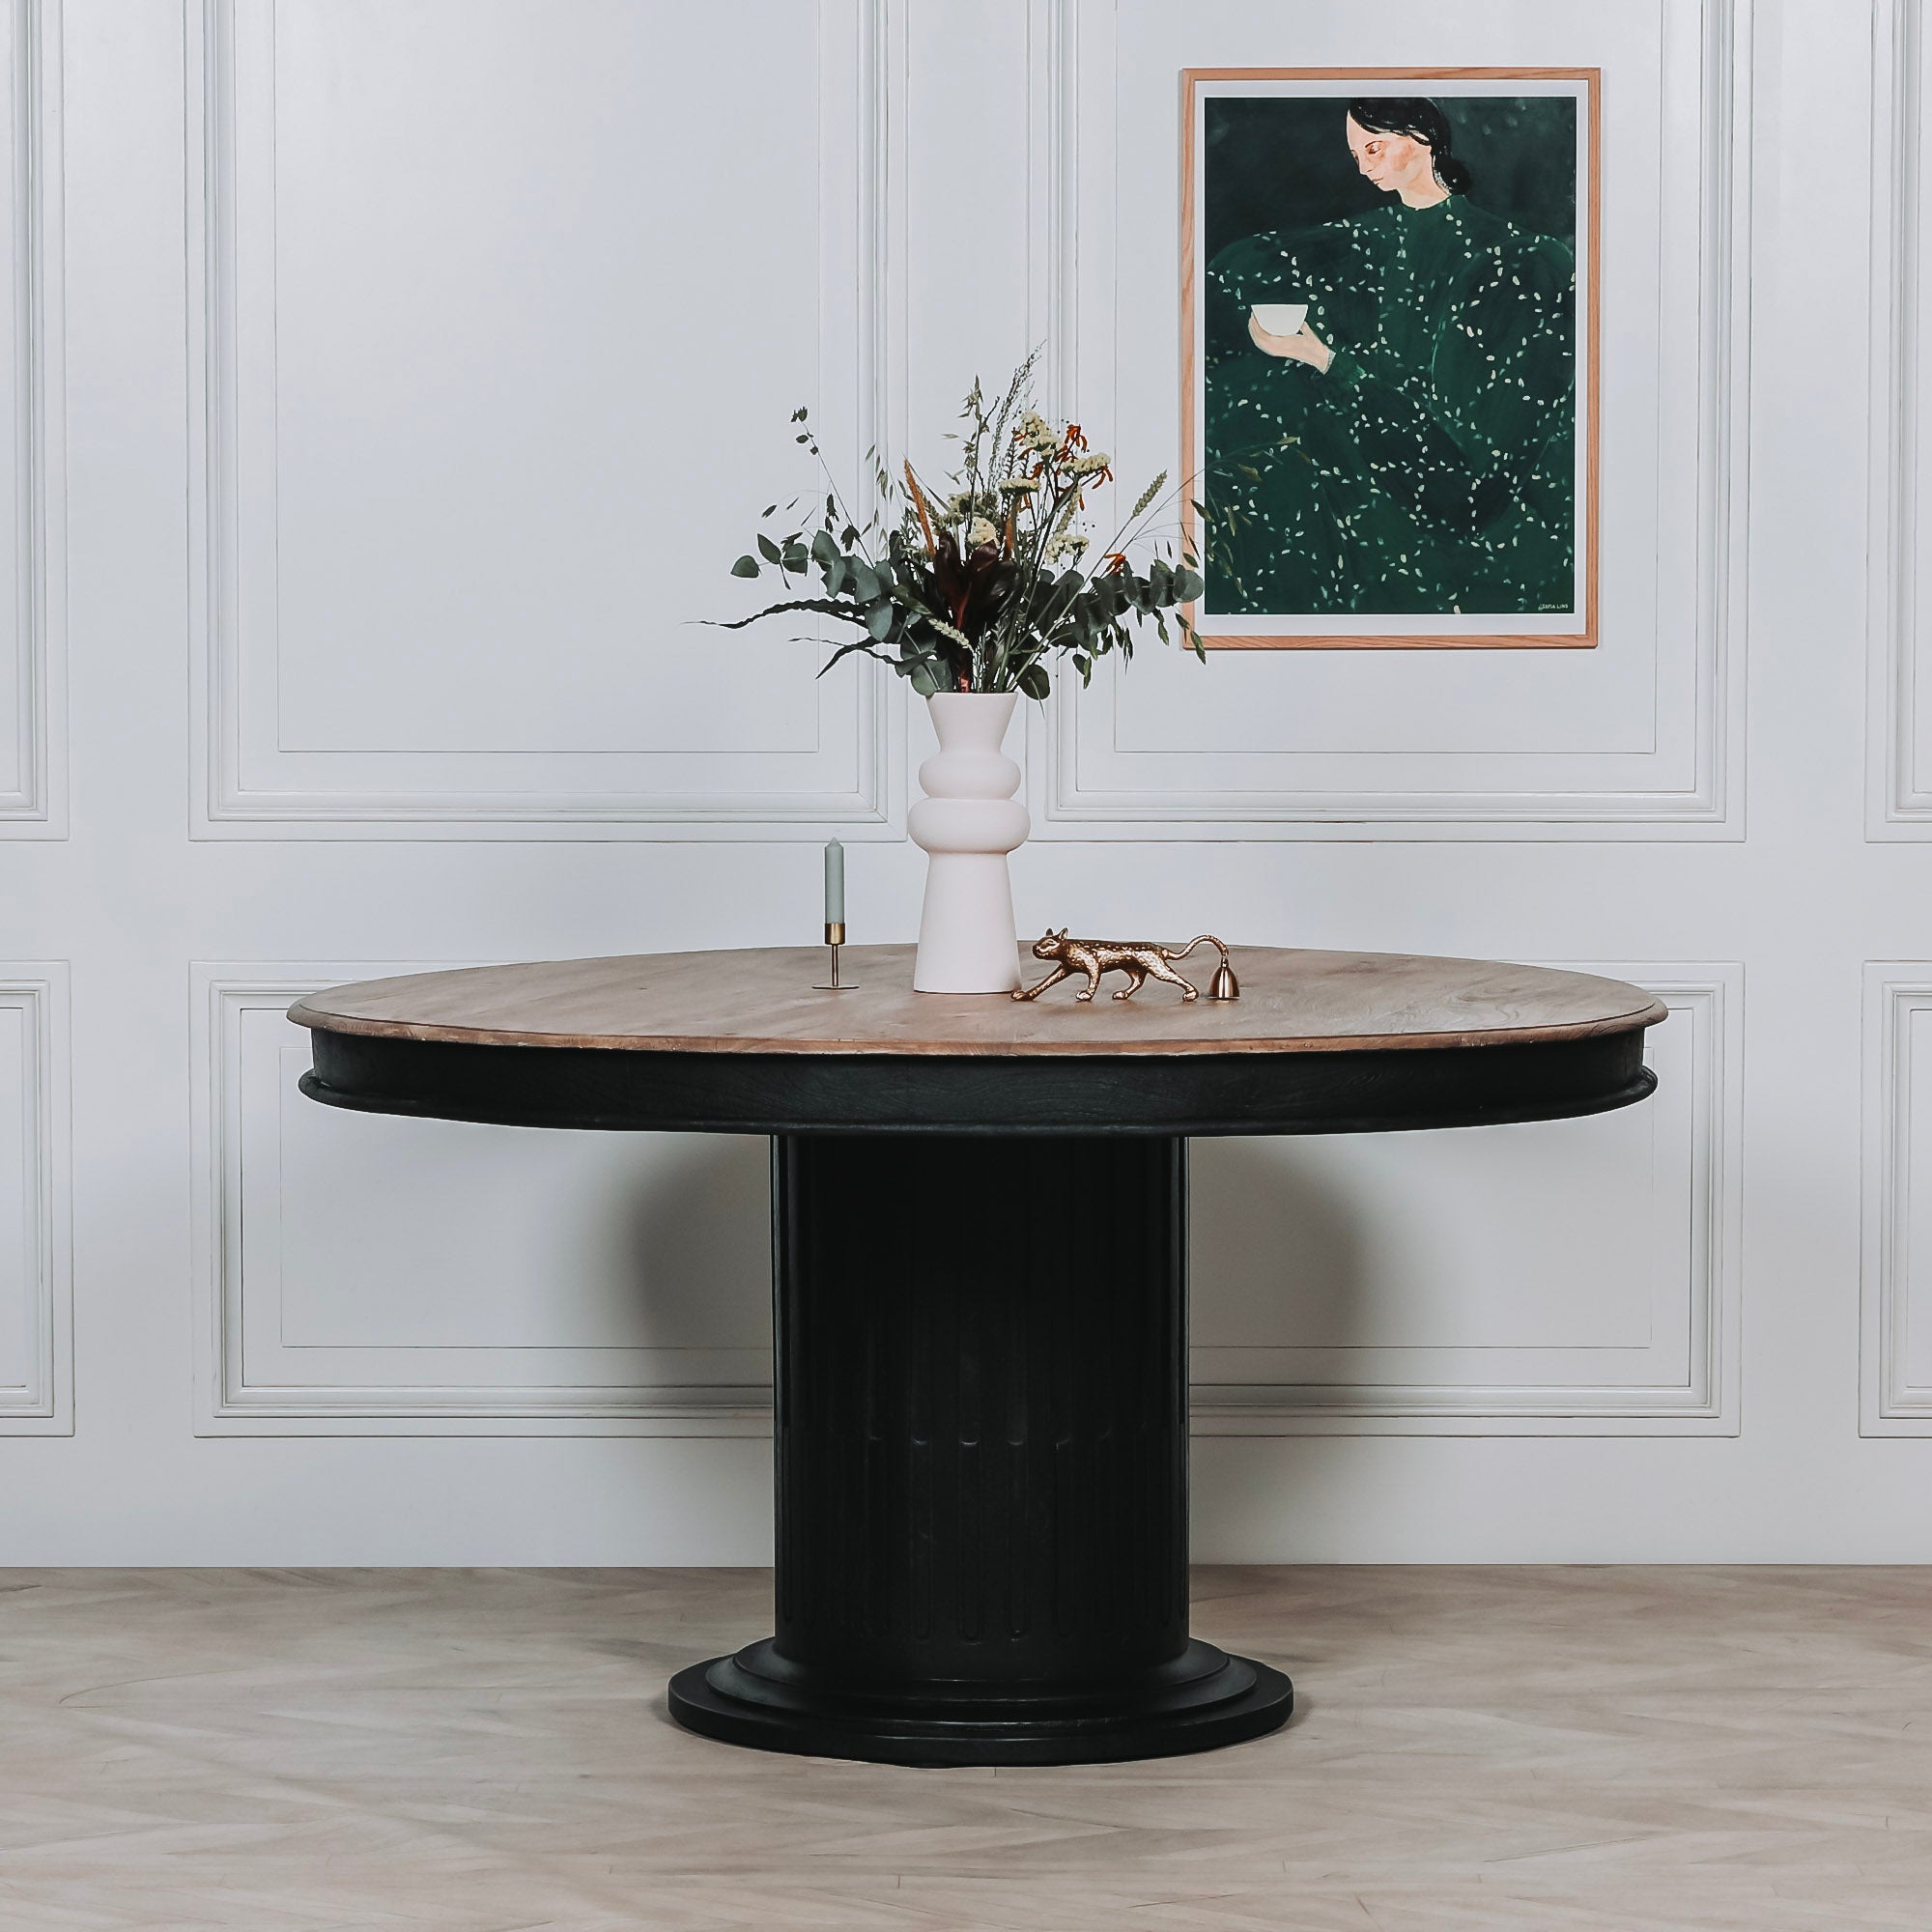 Matera Hand-Painted Mango Wood Round Dining Table